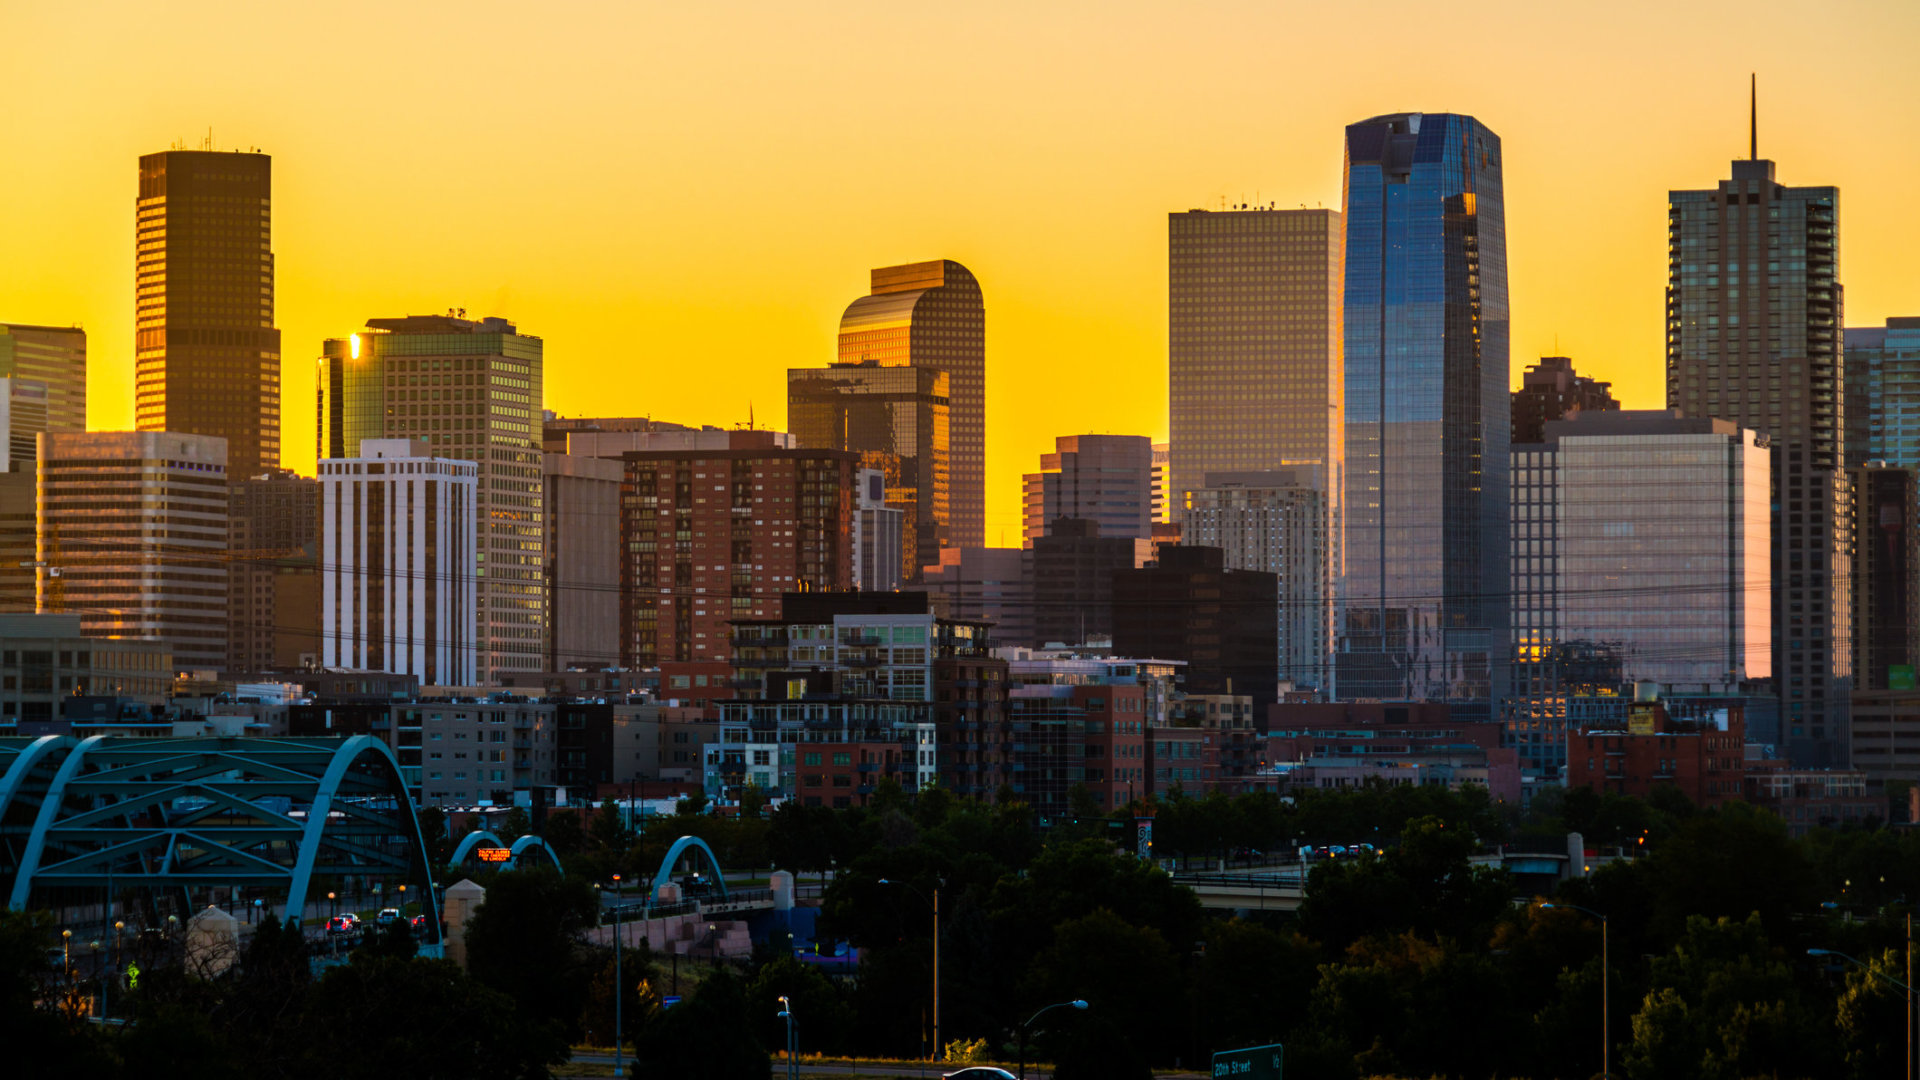 Orange Glow Sunrise in the Mile High City - Denver Colorado USA - Close up on Skyline Cityscape growing skyscrapers - golden hour sunrise glowing orange downtown